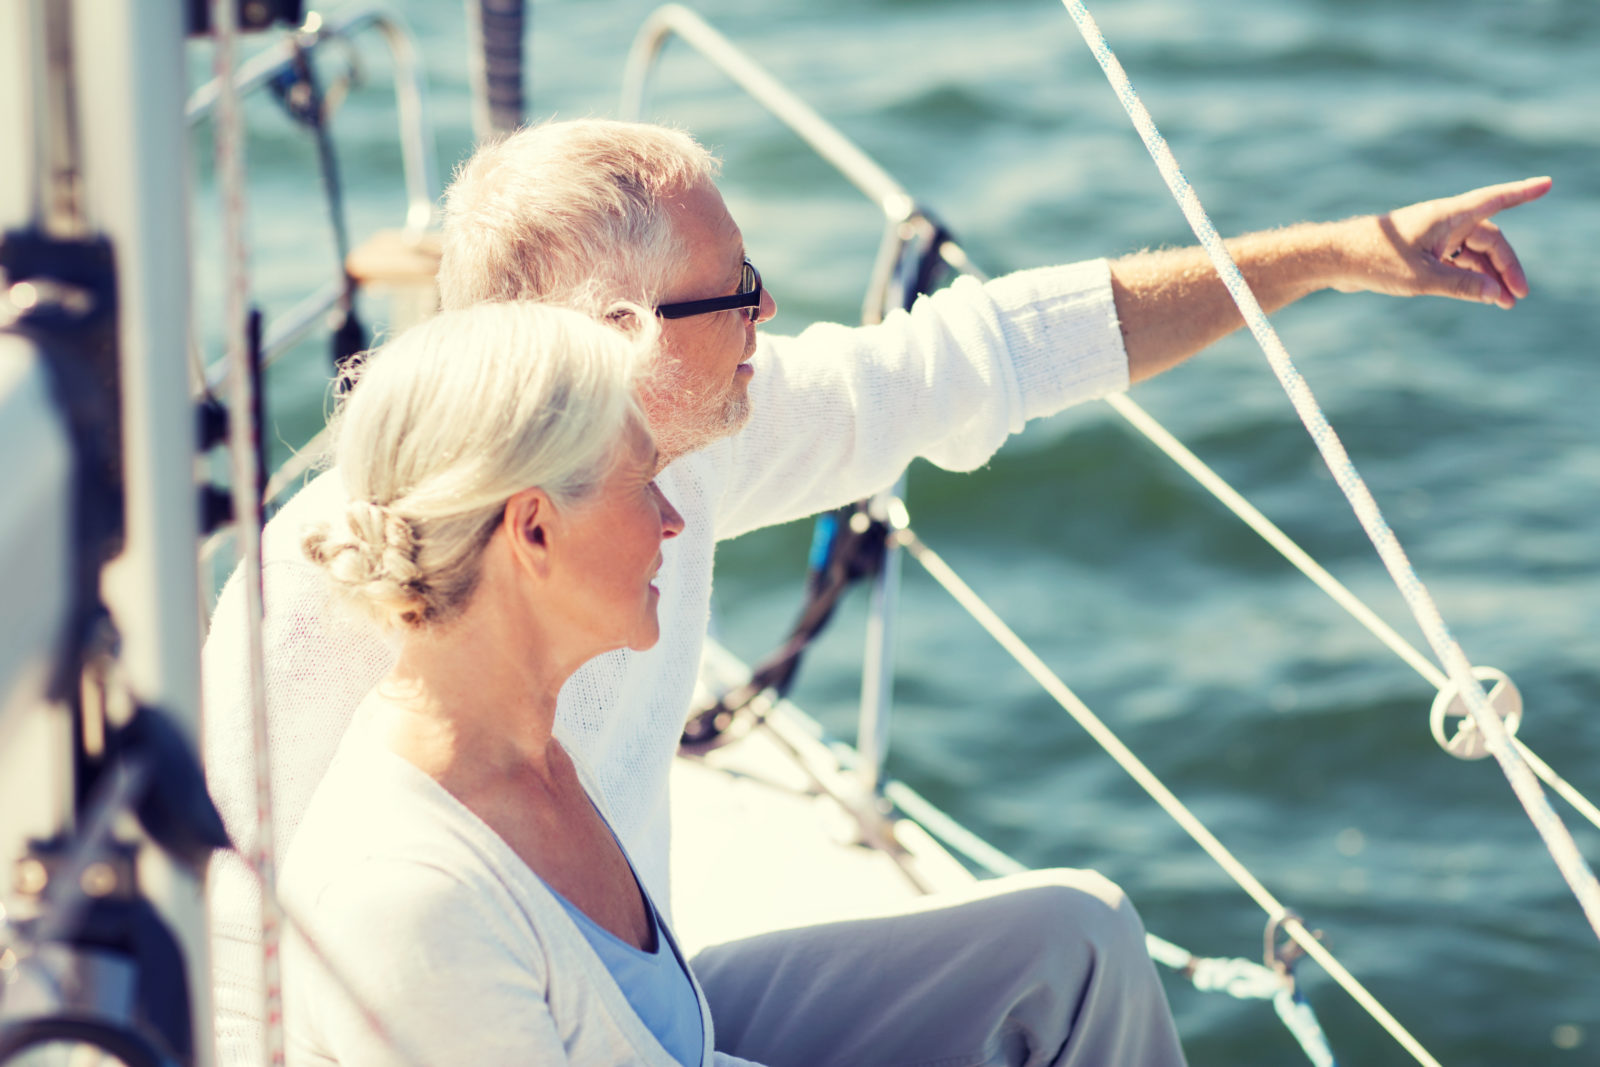 happy senior couple on sail boat or yacht in sea